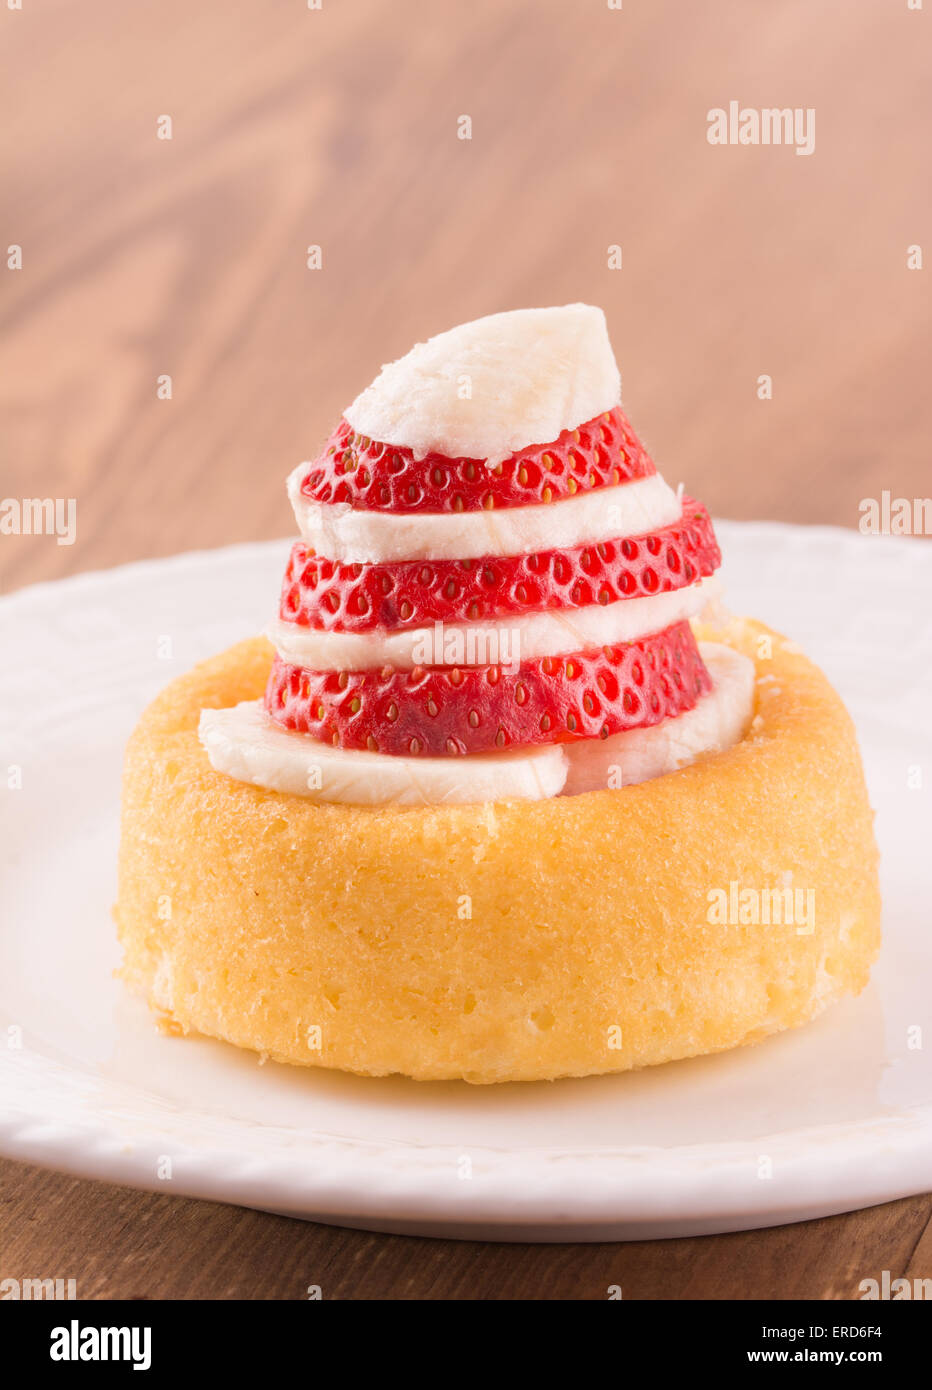 Dessert shell with sliced strawberry and banana, on a white plate Stock Photo